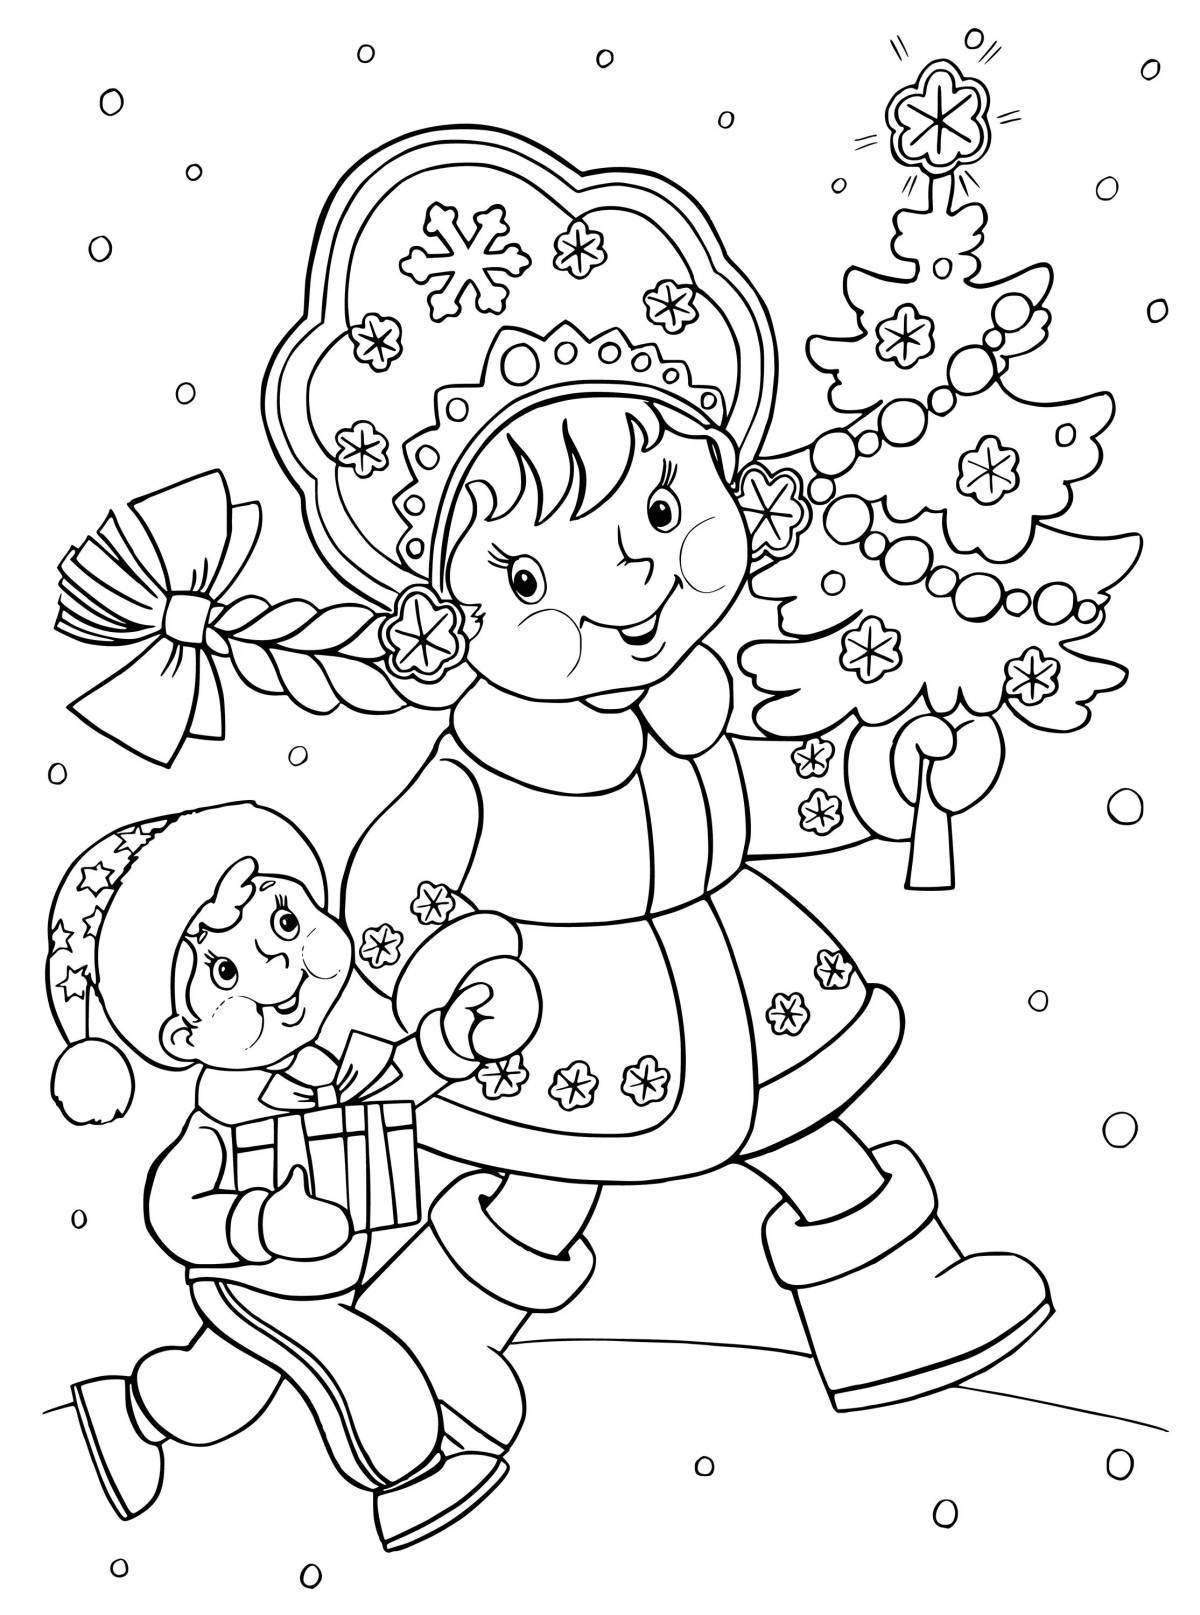 Great coloring tree and snow maiden